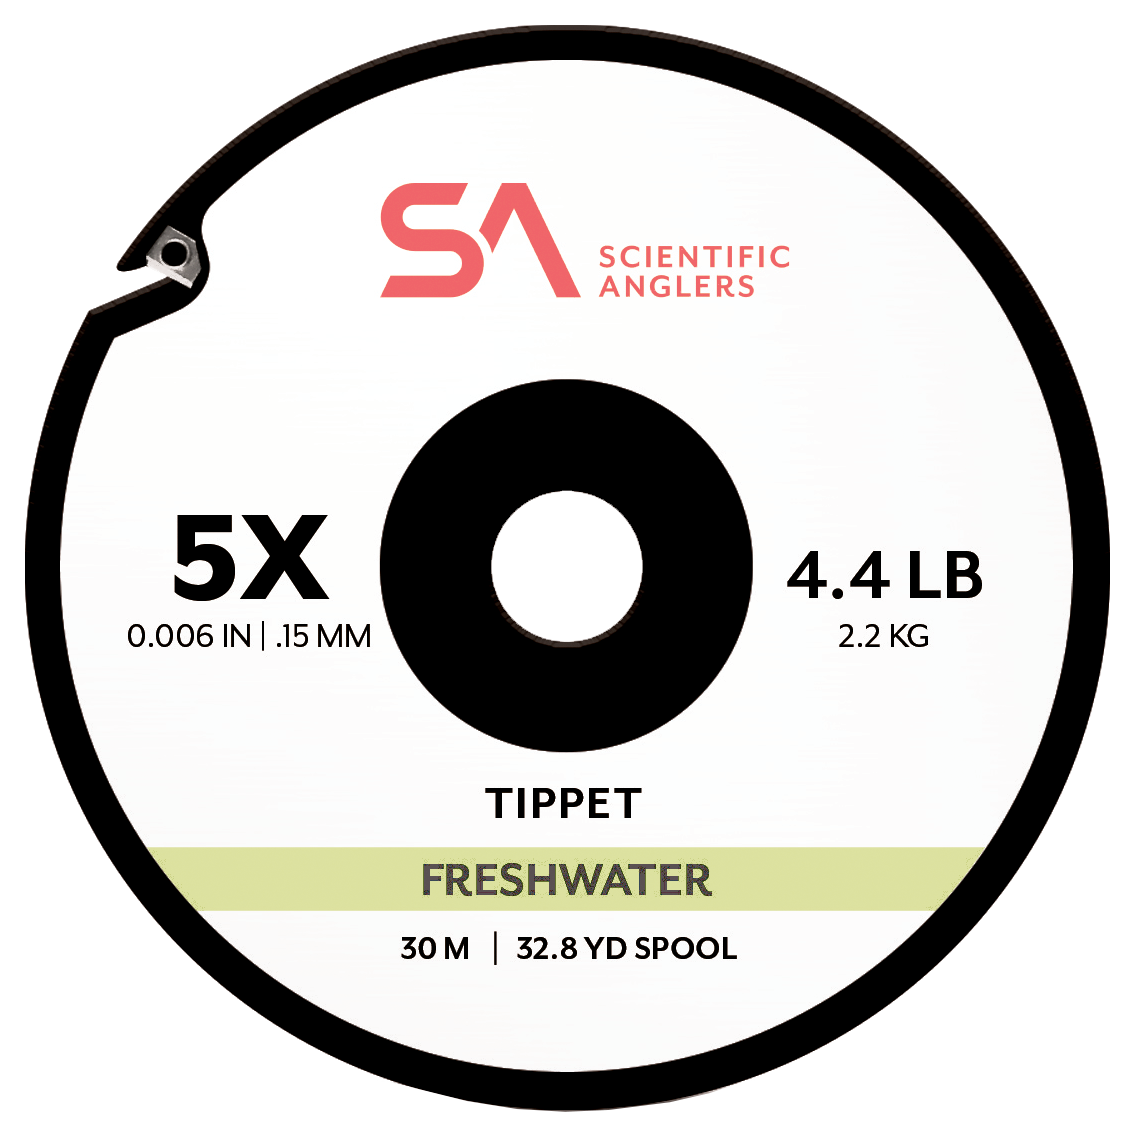 Scientific Angler Freshwater Tippet - 1X